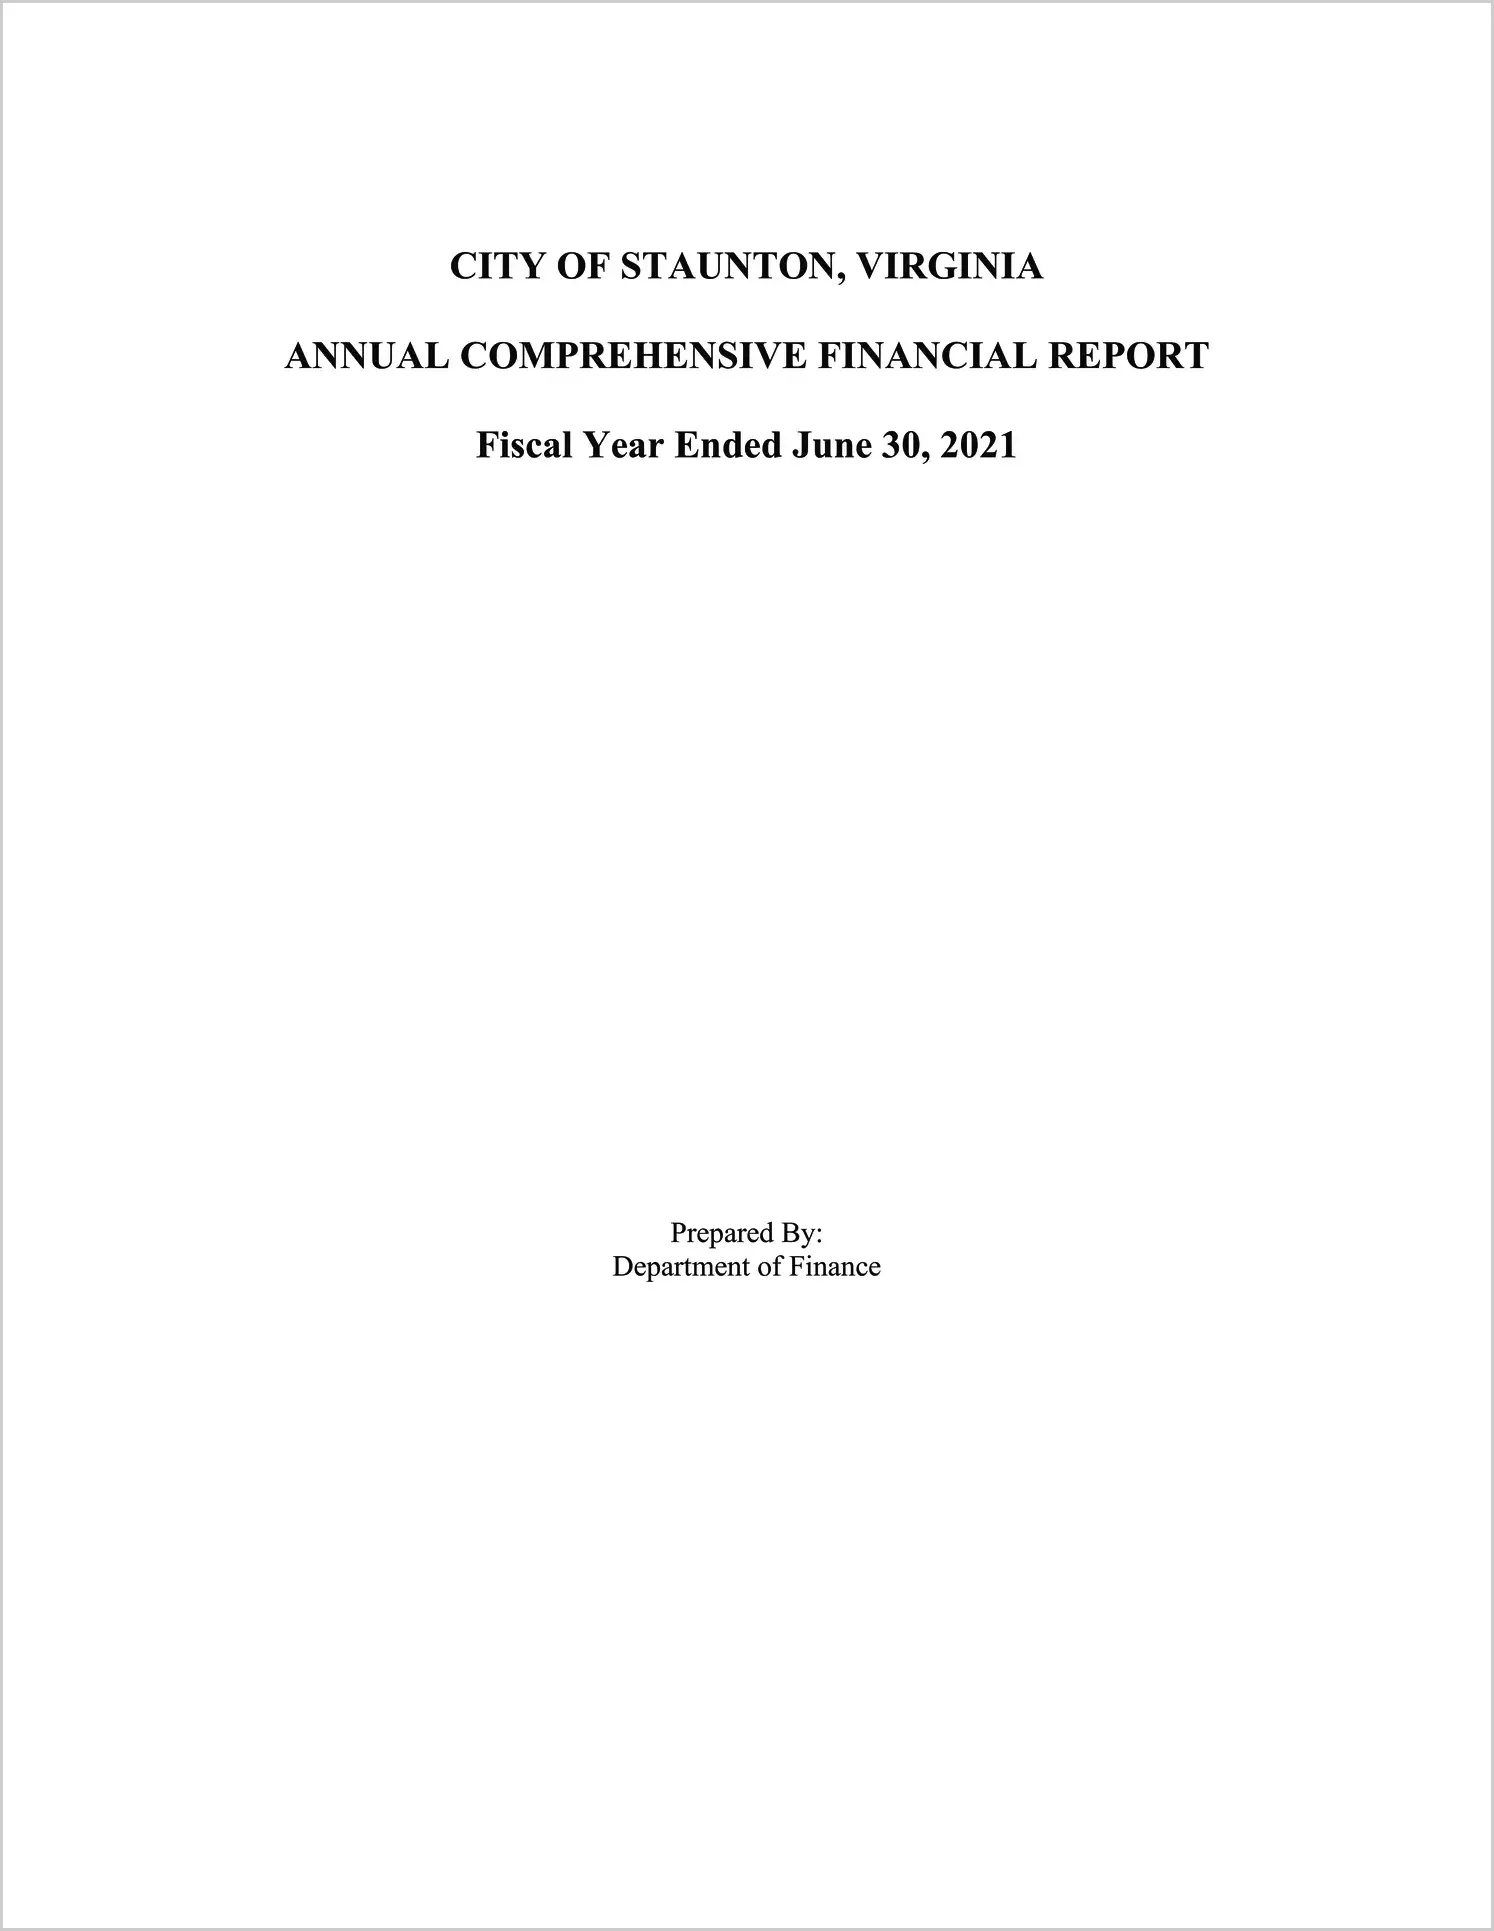 2021 Annual Financial Report for City of Staunton